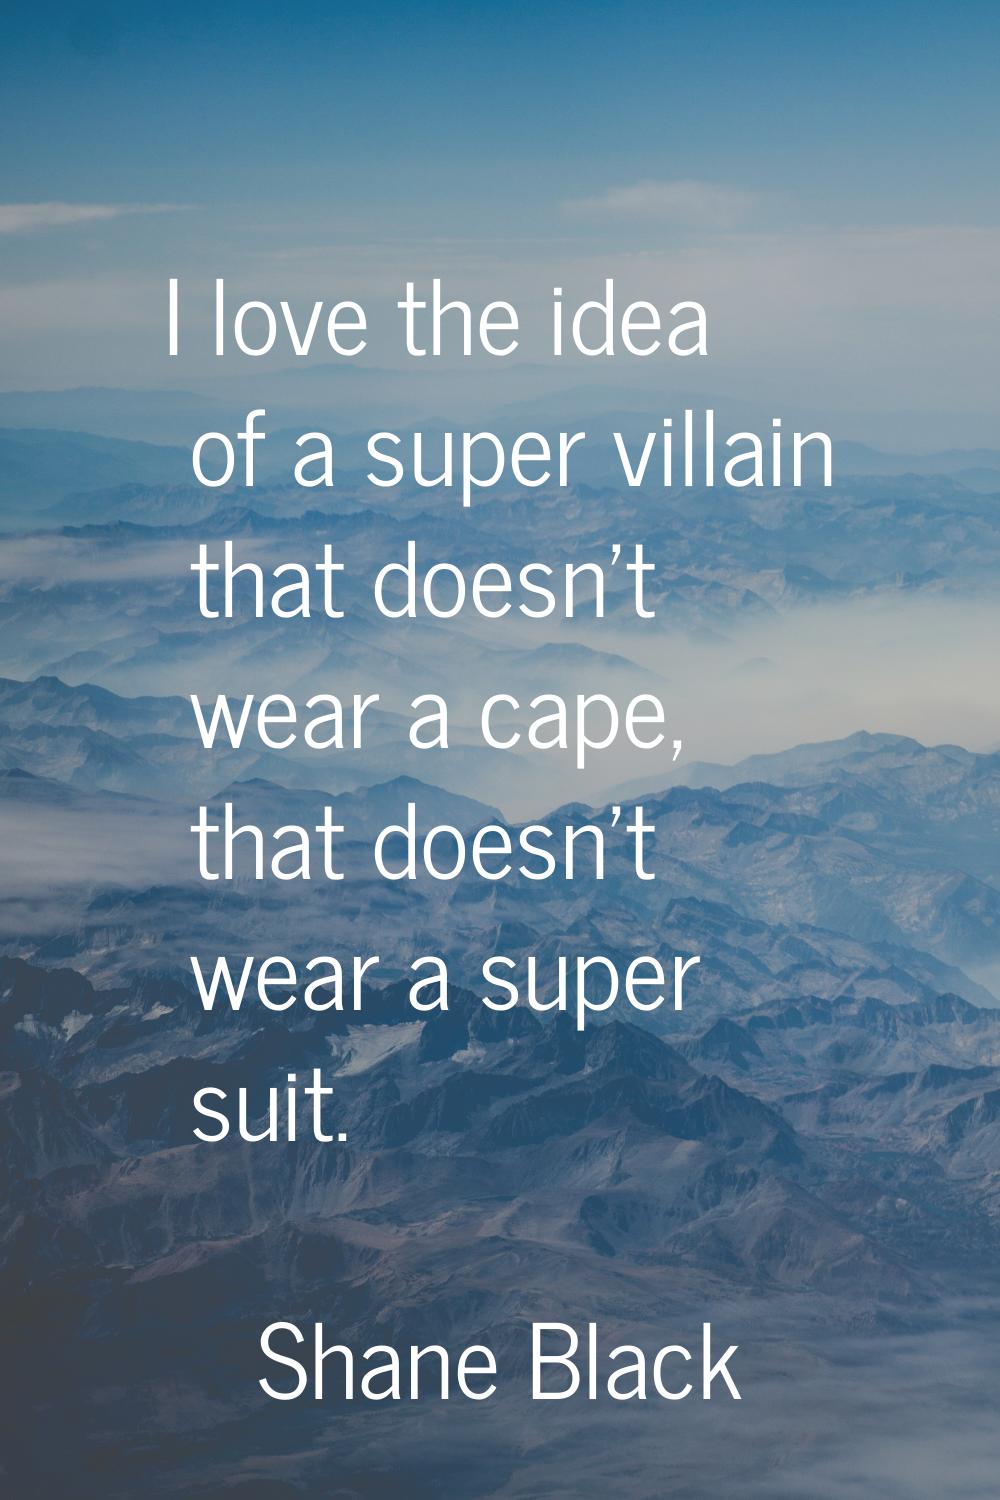 I love the idea of a super villain that doesn't wear a cape, that doesn't wear a super suit.